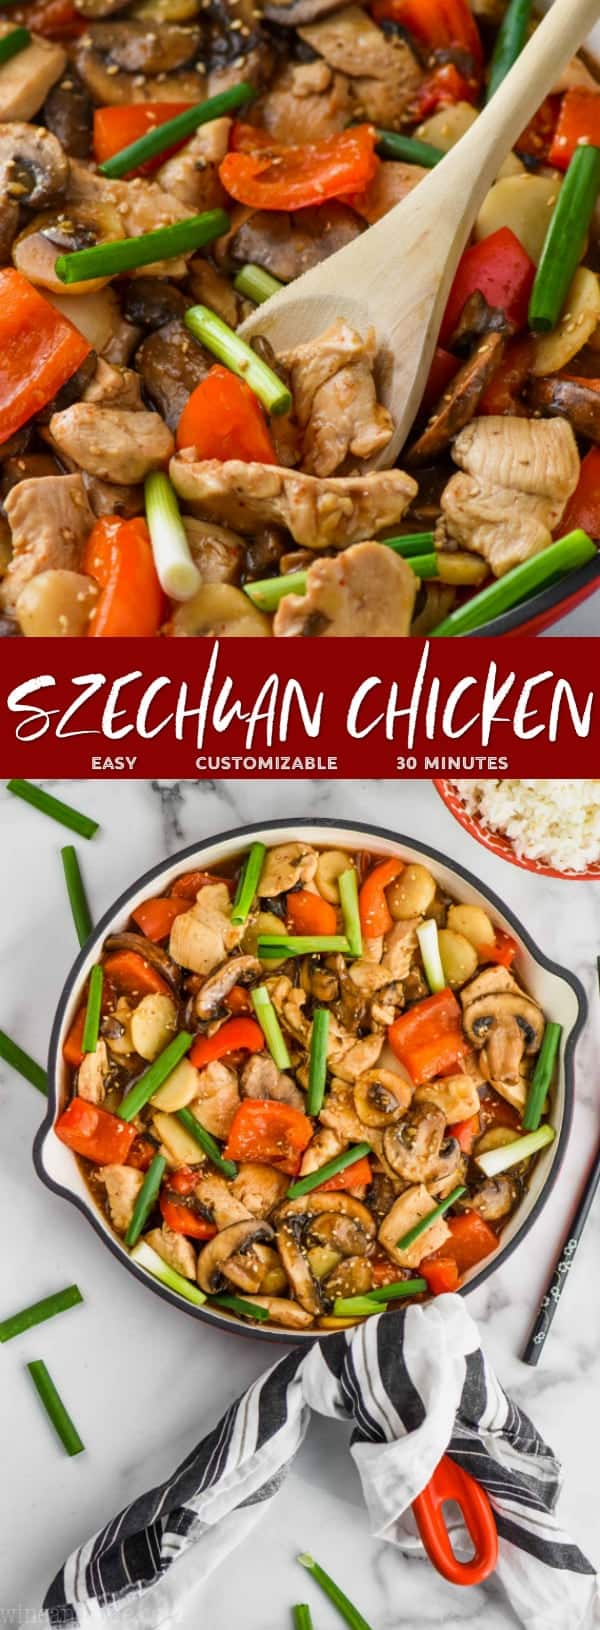 Serving spoon digging into a skillet of easy szechuan chicken